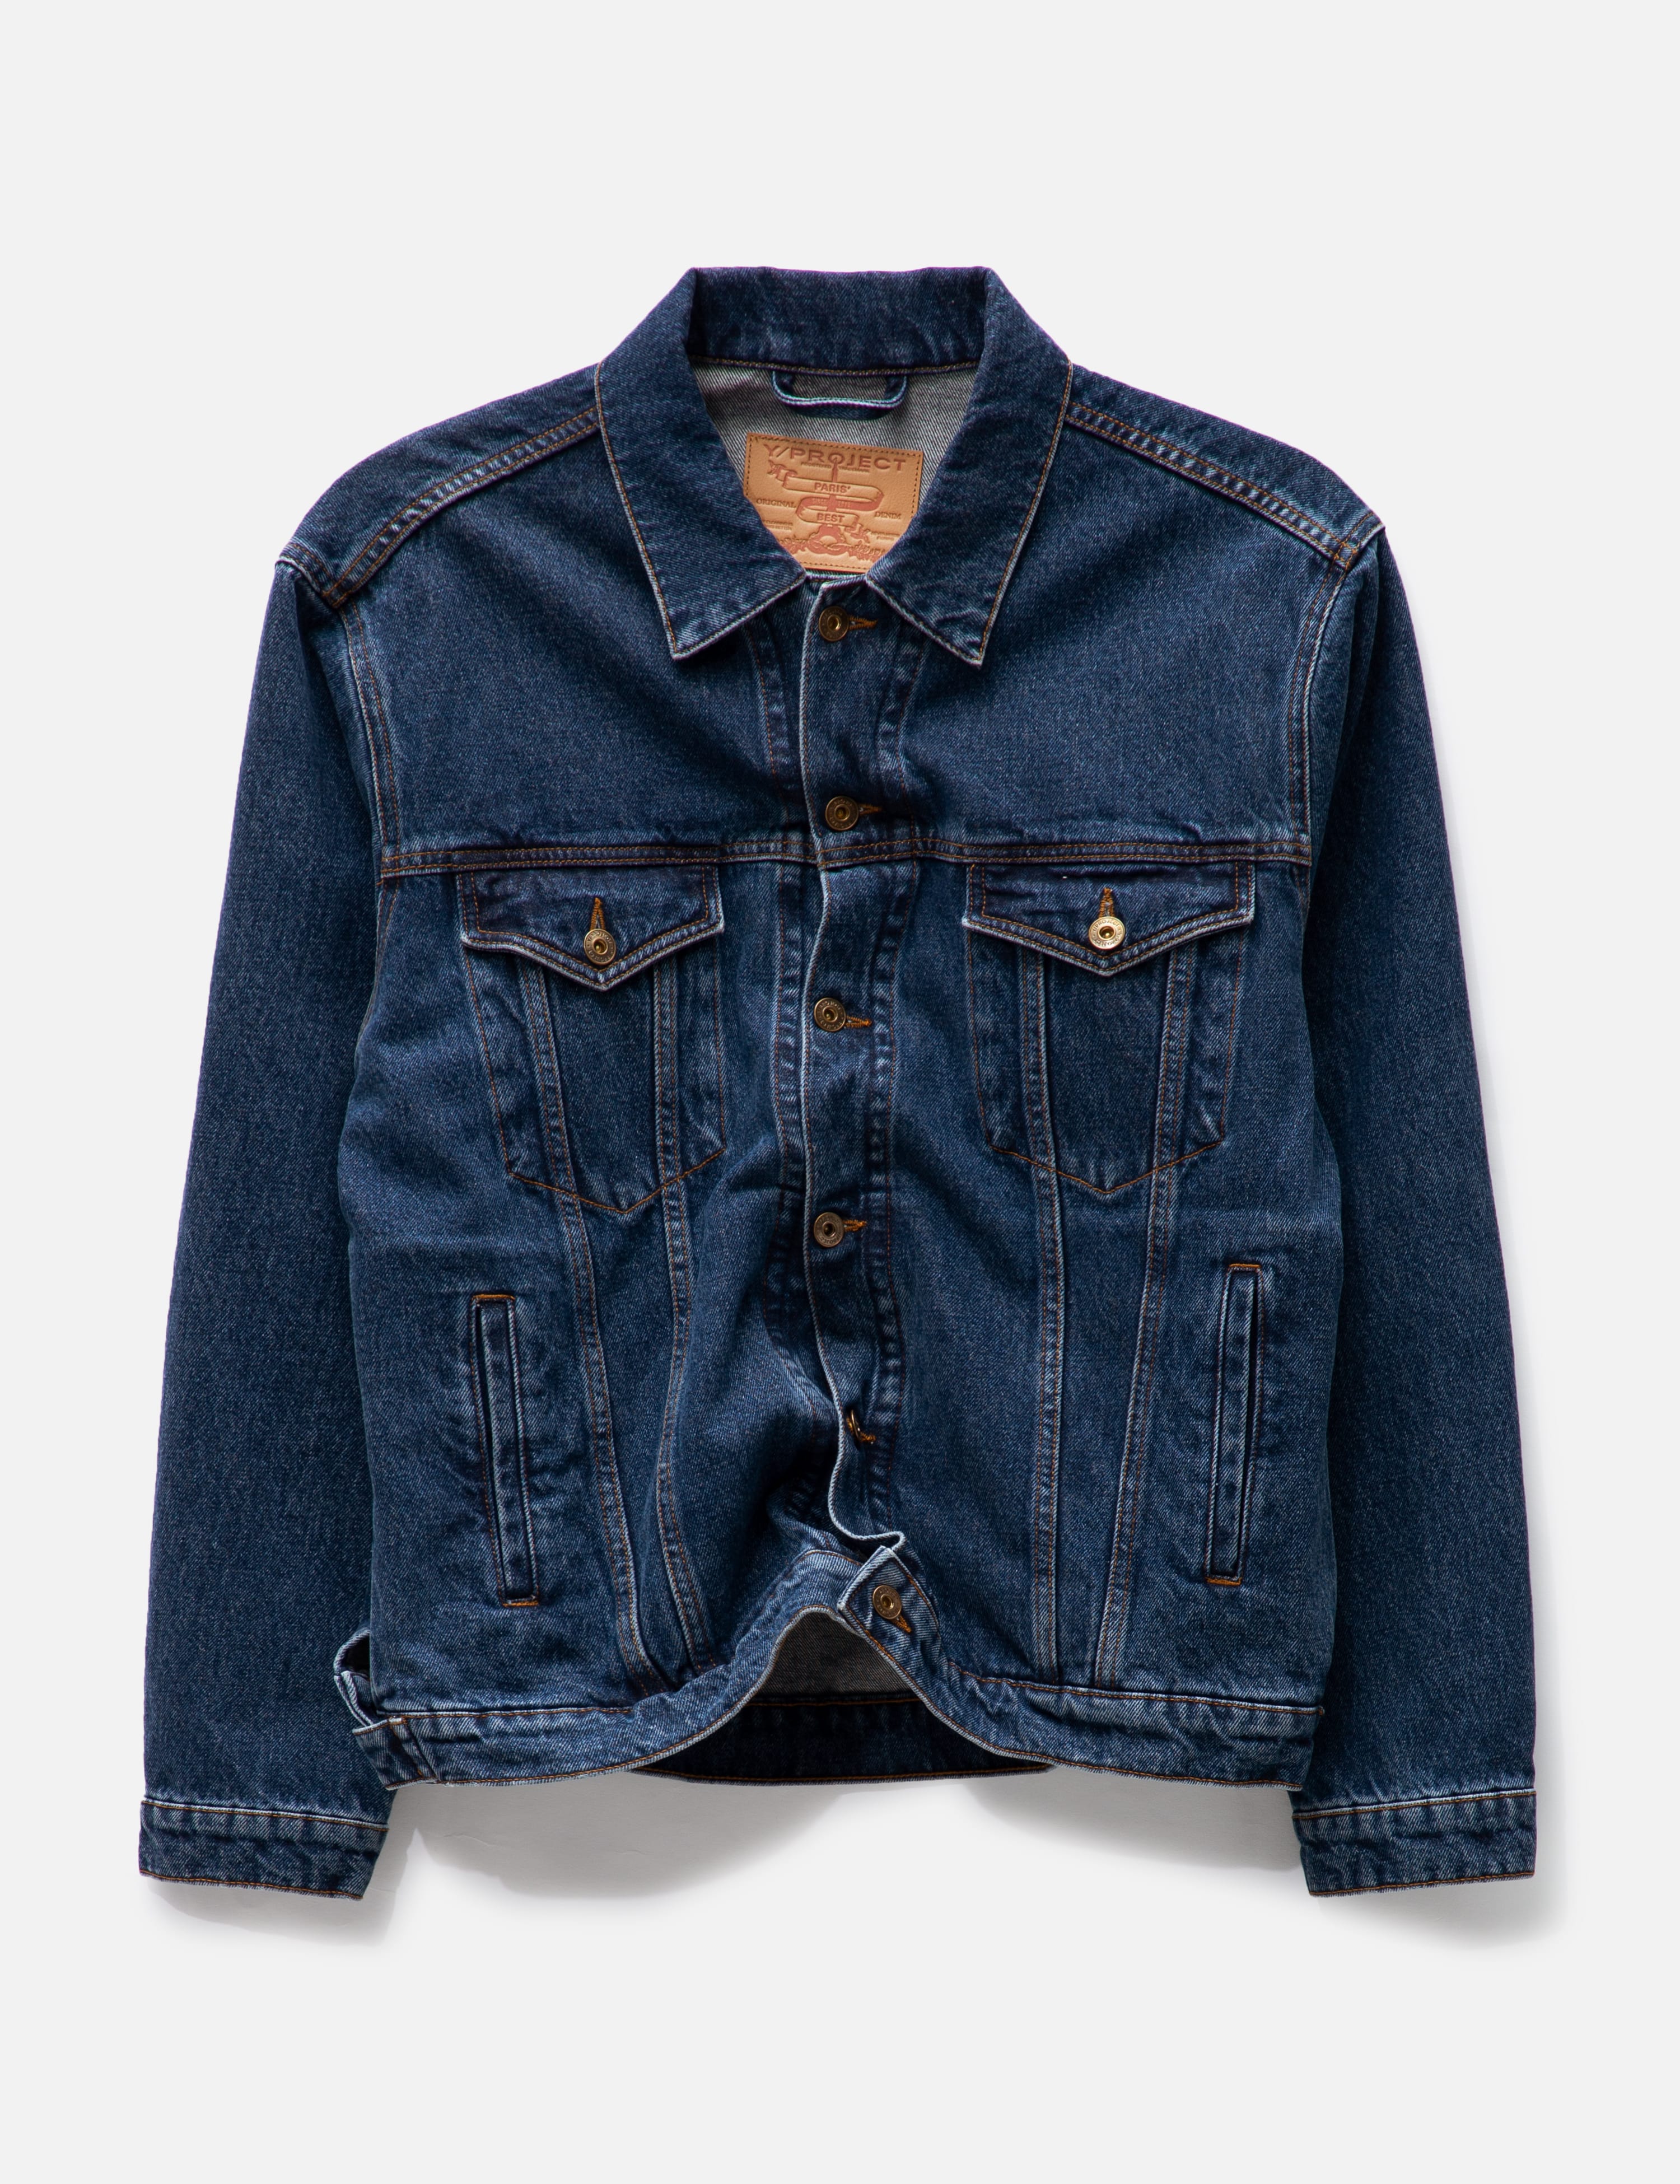 Y/PROJECT - CLASSIC WIRE DENIM JACKET | HBX - Globally Curated